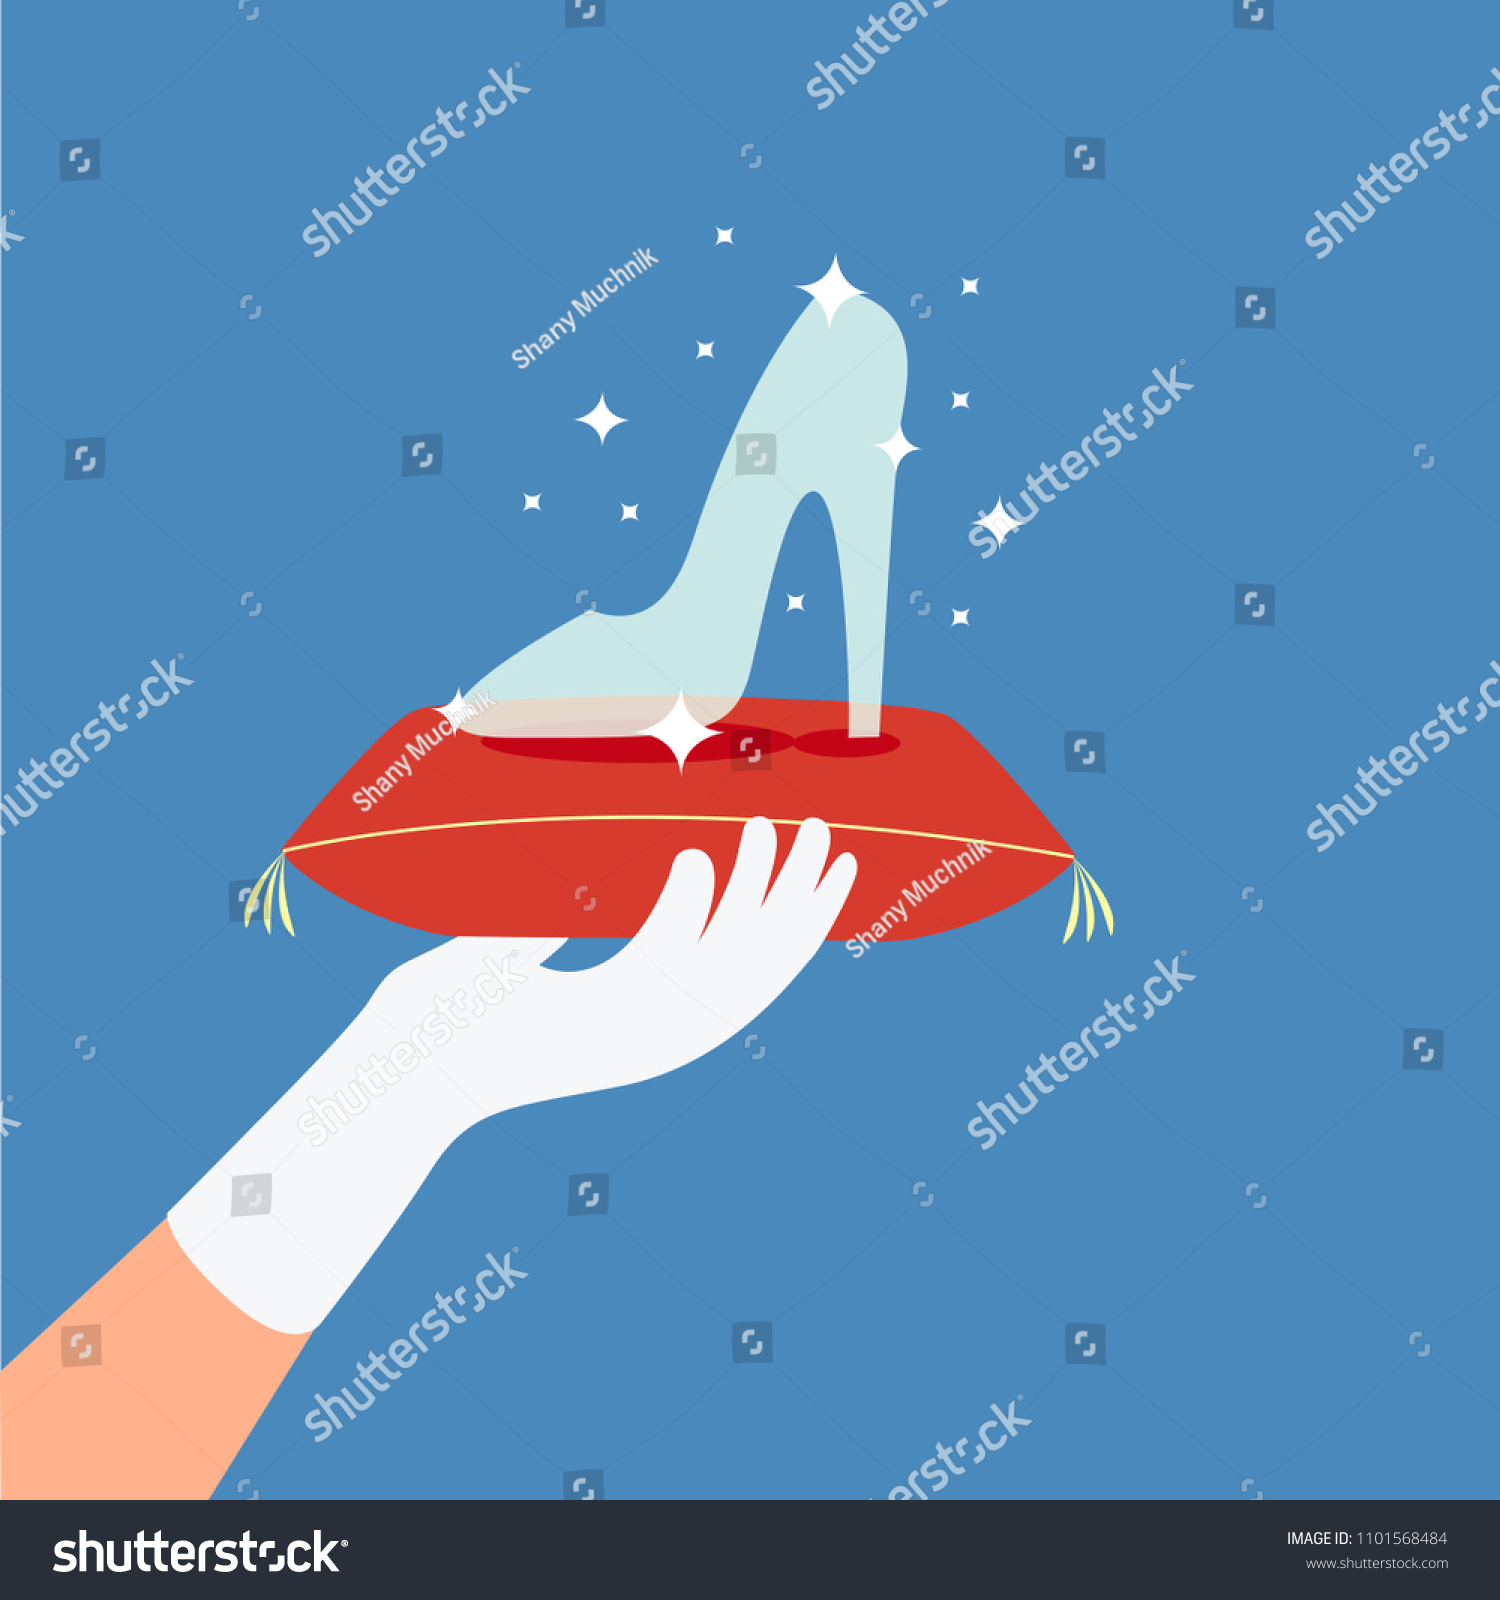 SVG of hand prince holding a princess shoe or cinderella glass slipper vector isolated on cushion or pillow. love story concept & creative cartoon. white glove flat design. wedding card. dating & blind date svg